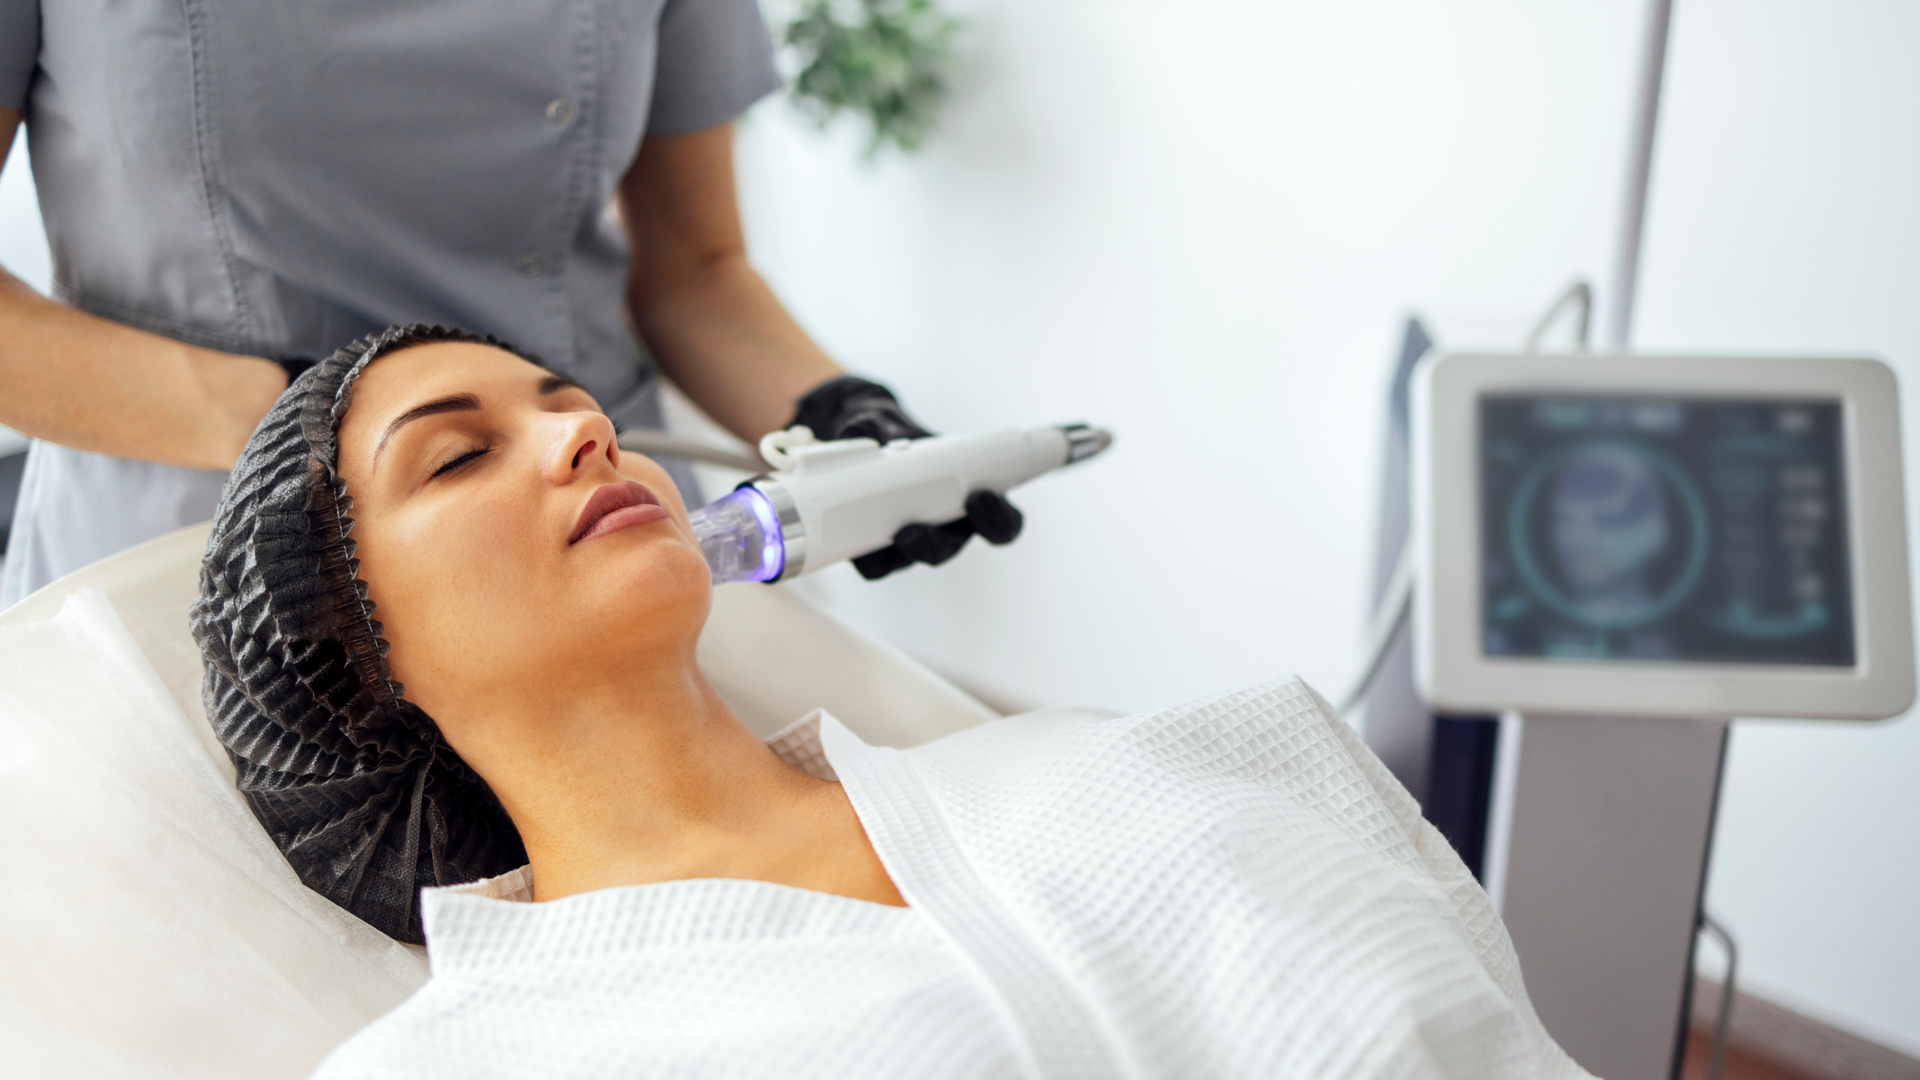 The Benefits of Using At-Home Radiofrequency Treatments in Conjunction with Other Anti-Aging Techniques